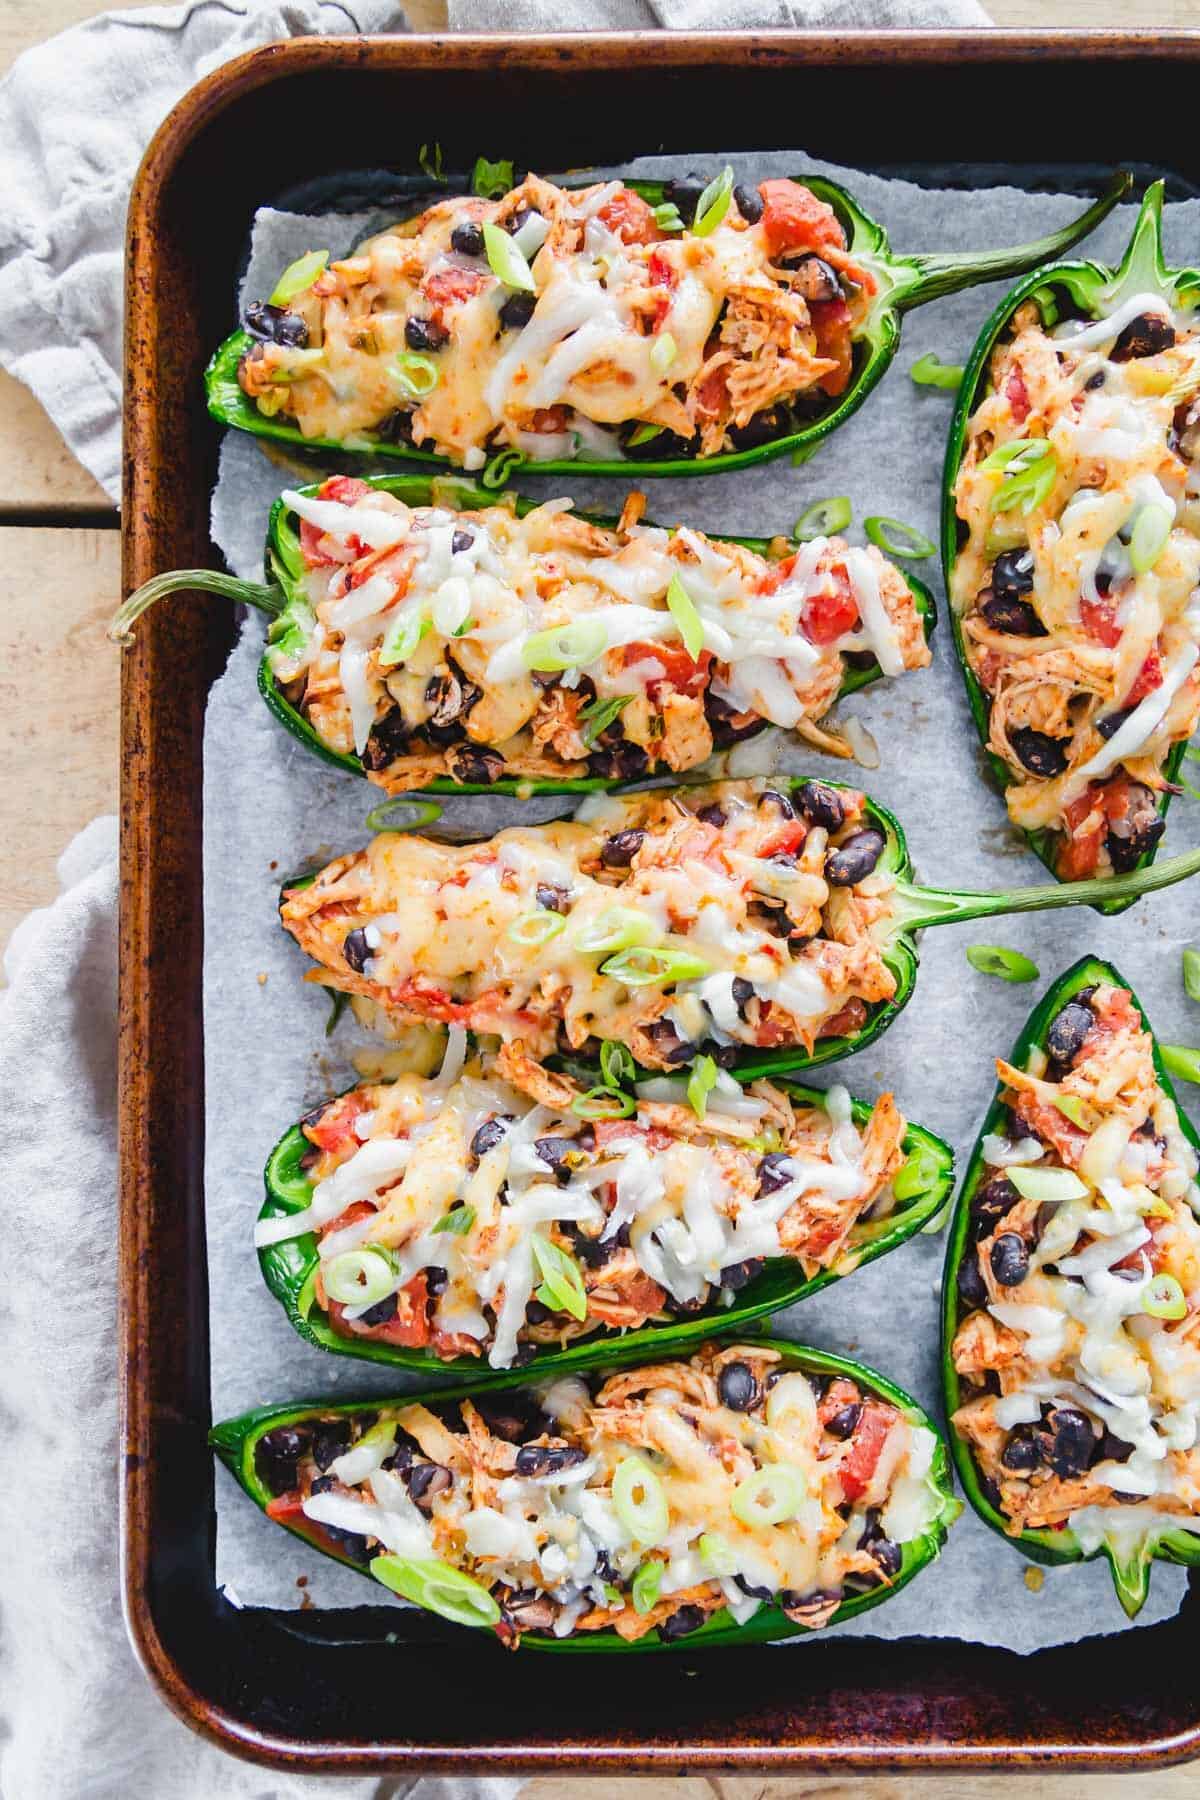 Cheesy baked stuffed poblano peppers with chicken, black beans, tomatoes and Mexican spices.